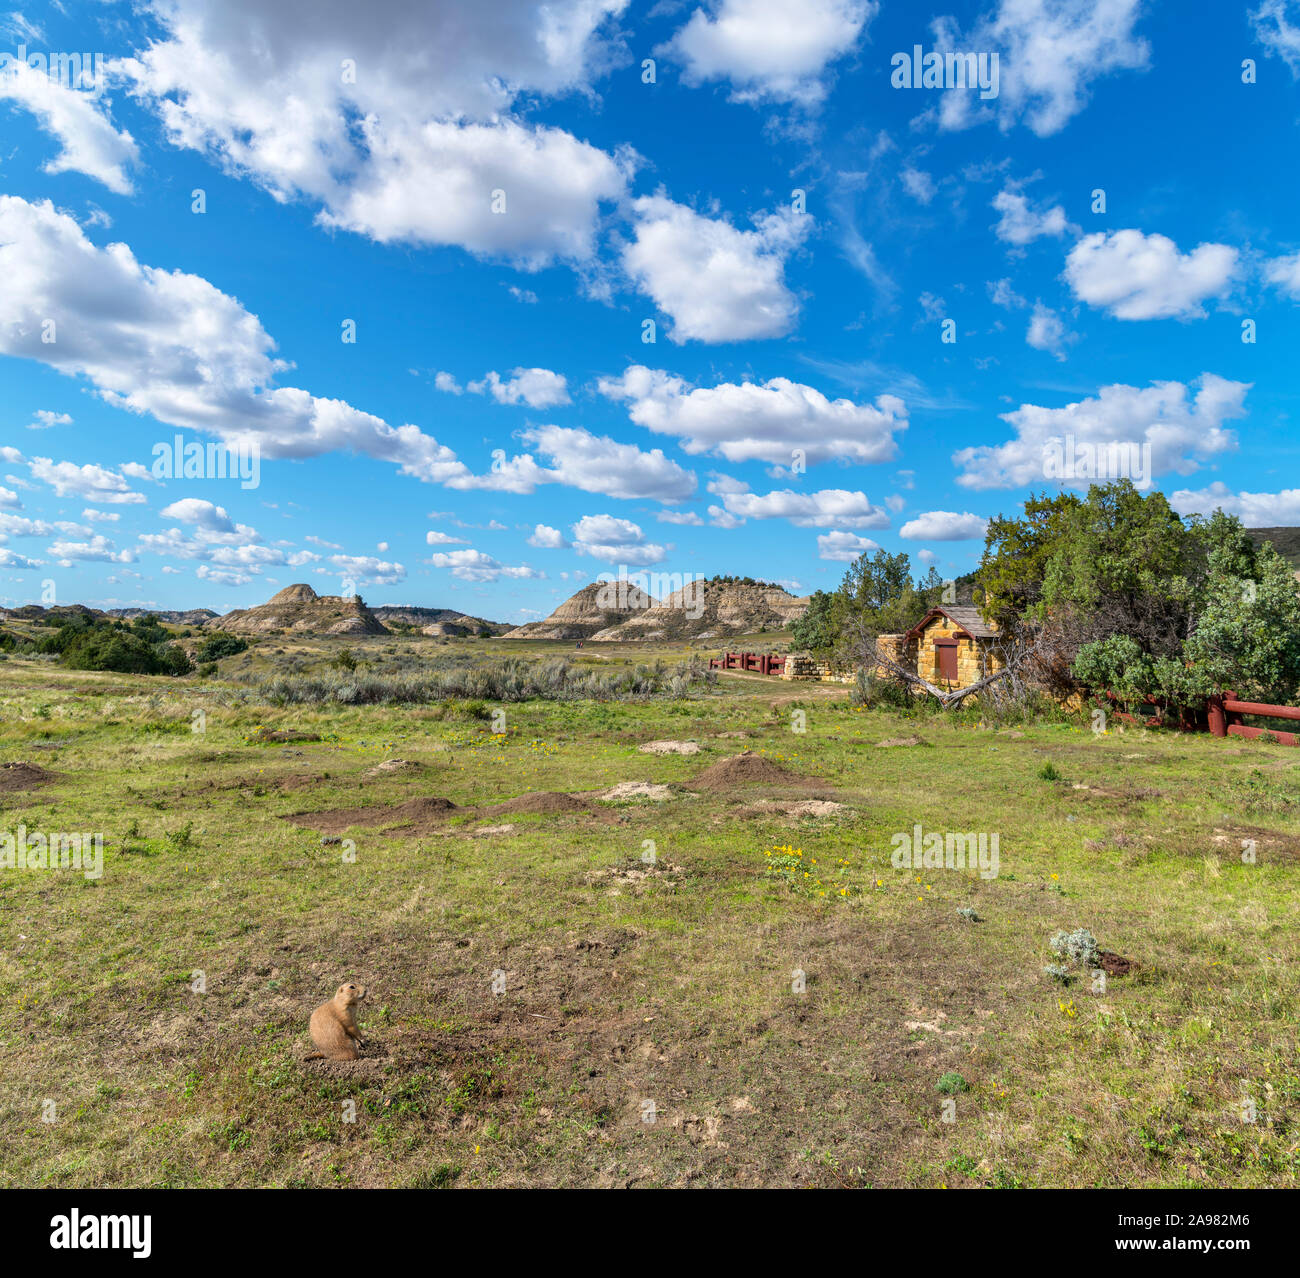 Prairie Dog town near the Old East Entrance, Theodore Roosevelt National Park, North Dakota, USA. A Prairie Dog is sitting in the foreground. Stock Photo